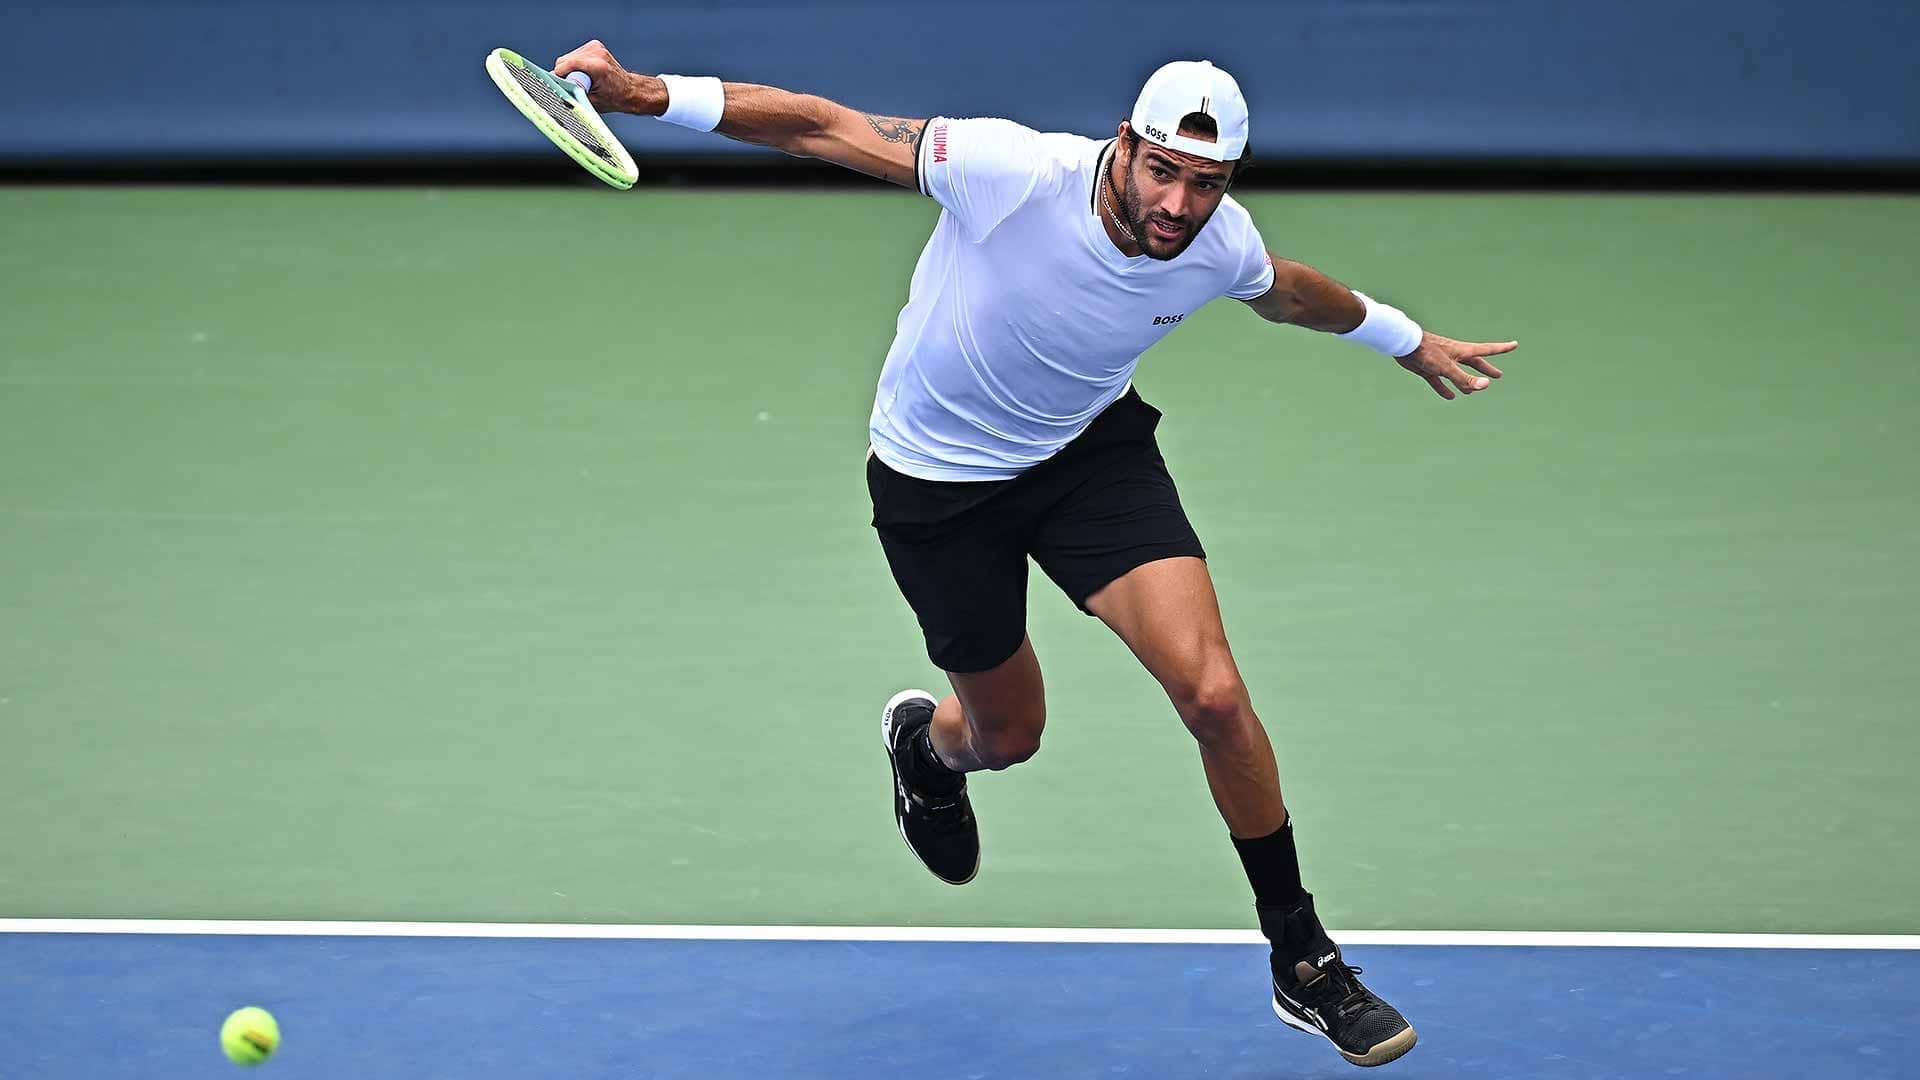 Matteo Berrettini last competed at the US Open in September.